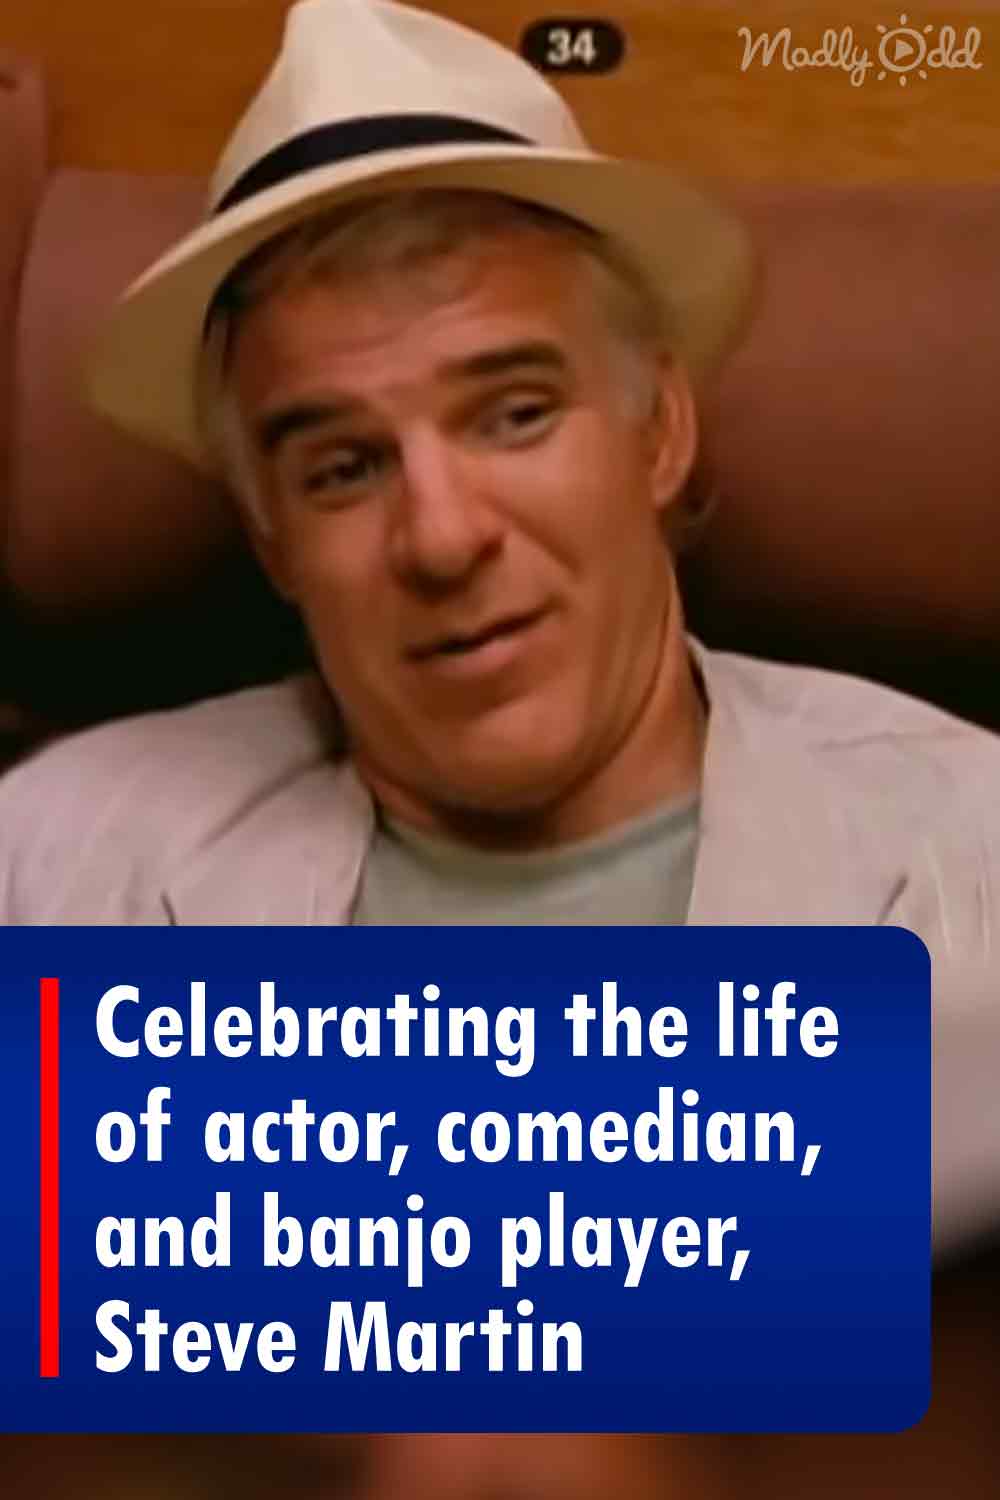 Celebrating the life of actor, comedian, and banjo player, Steve Martin